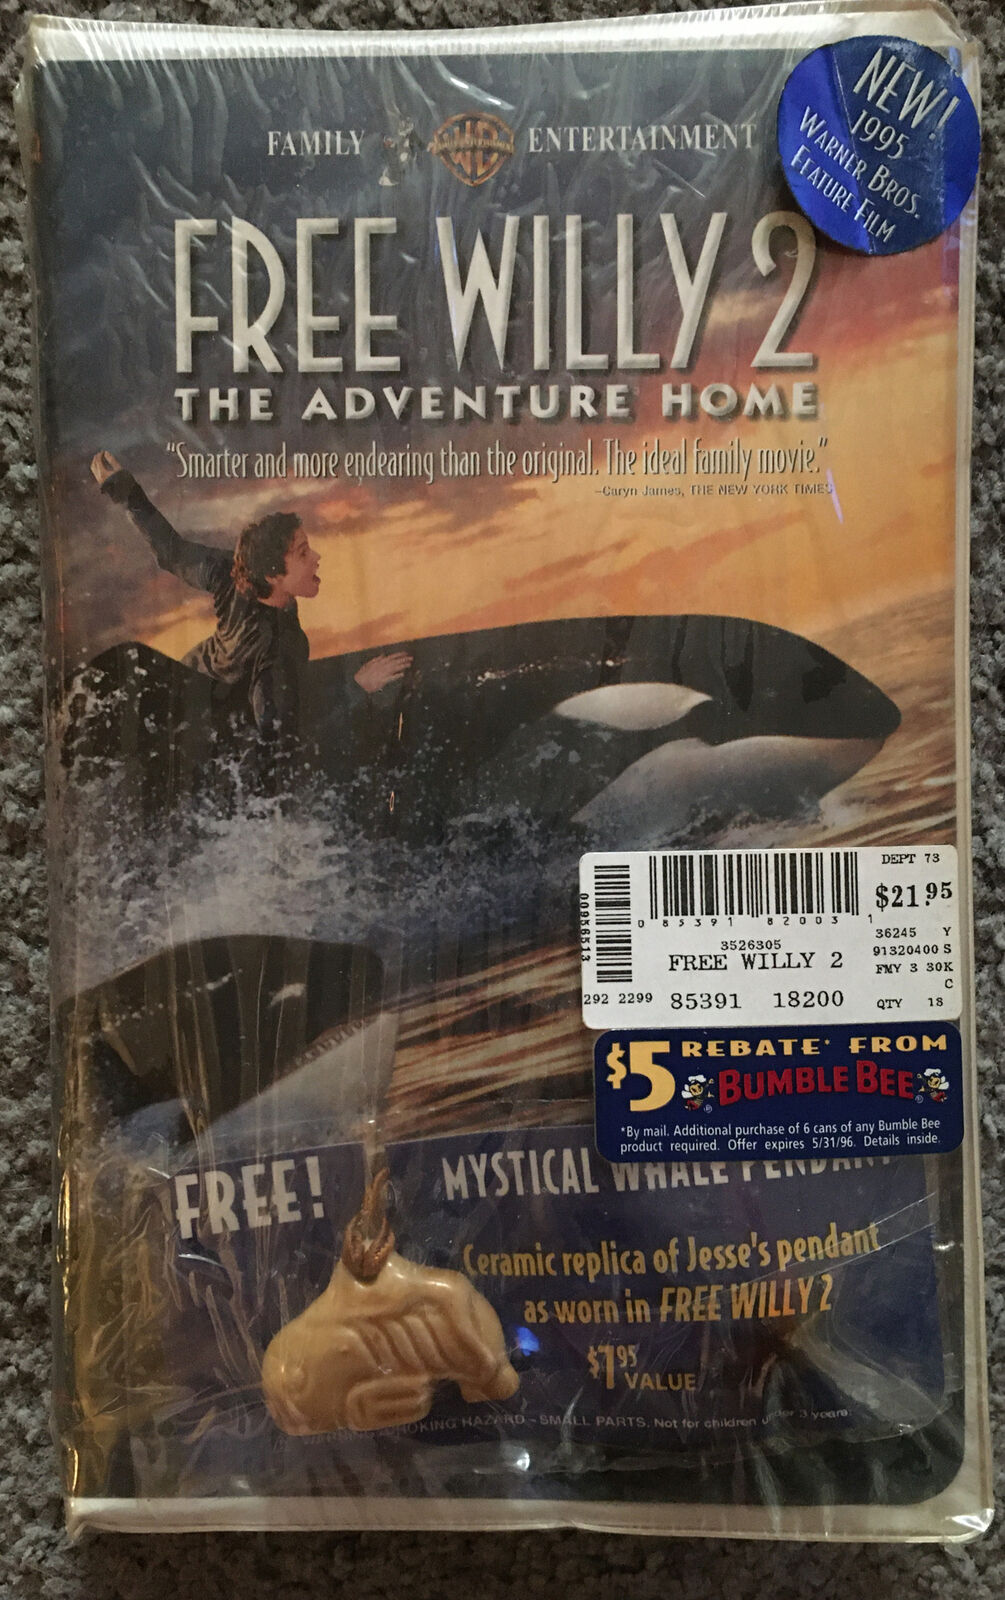 free willy necklace Free Willy 2 VHS with Mystical Whale Pendant Necklace for Sale - Celebrity  Cars Blog